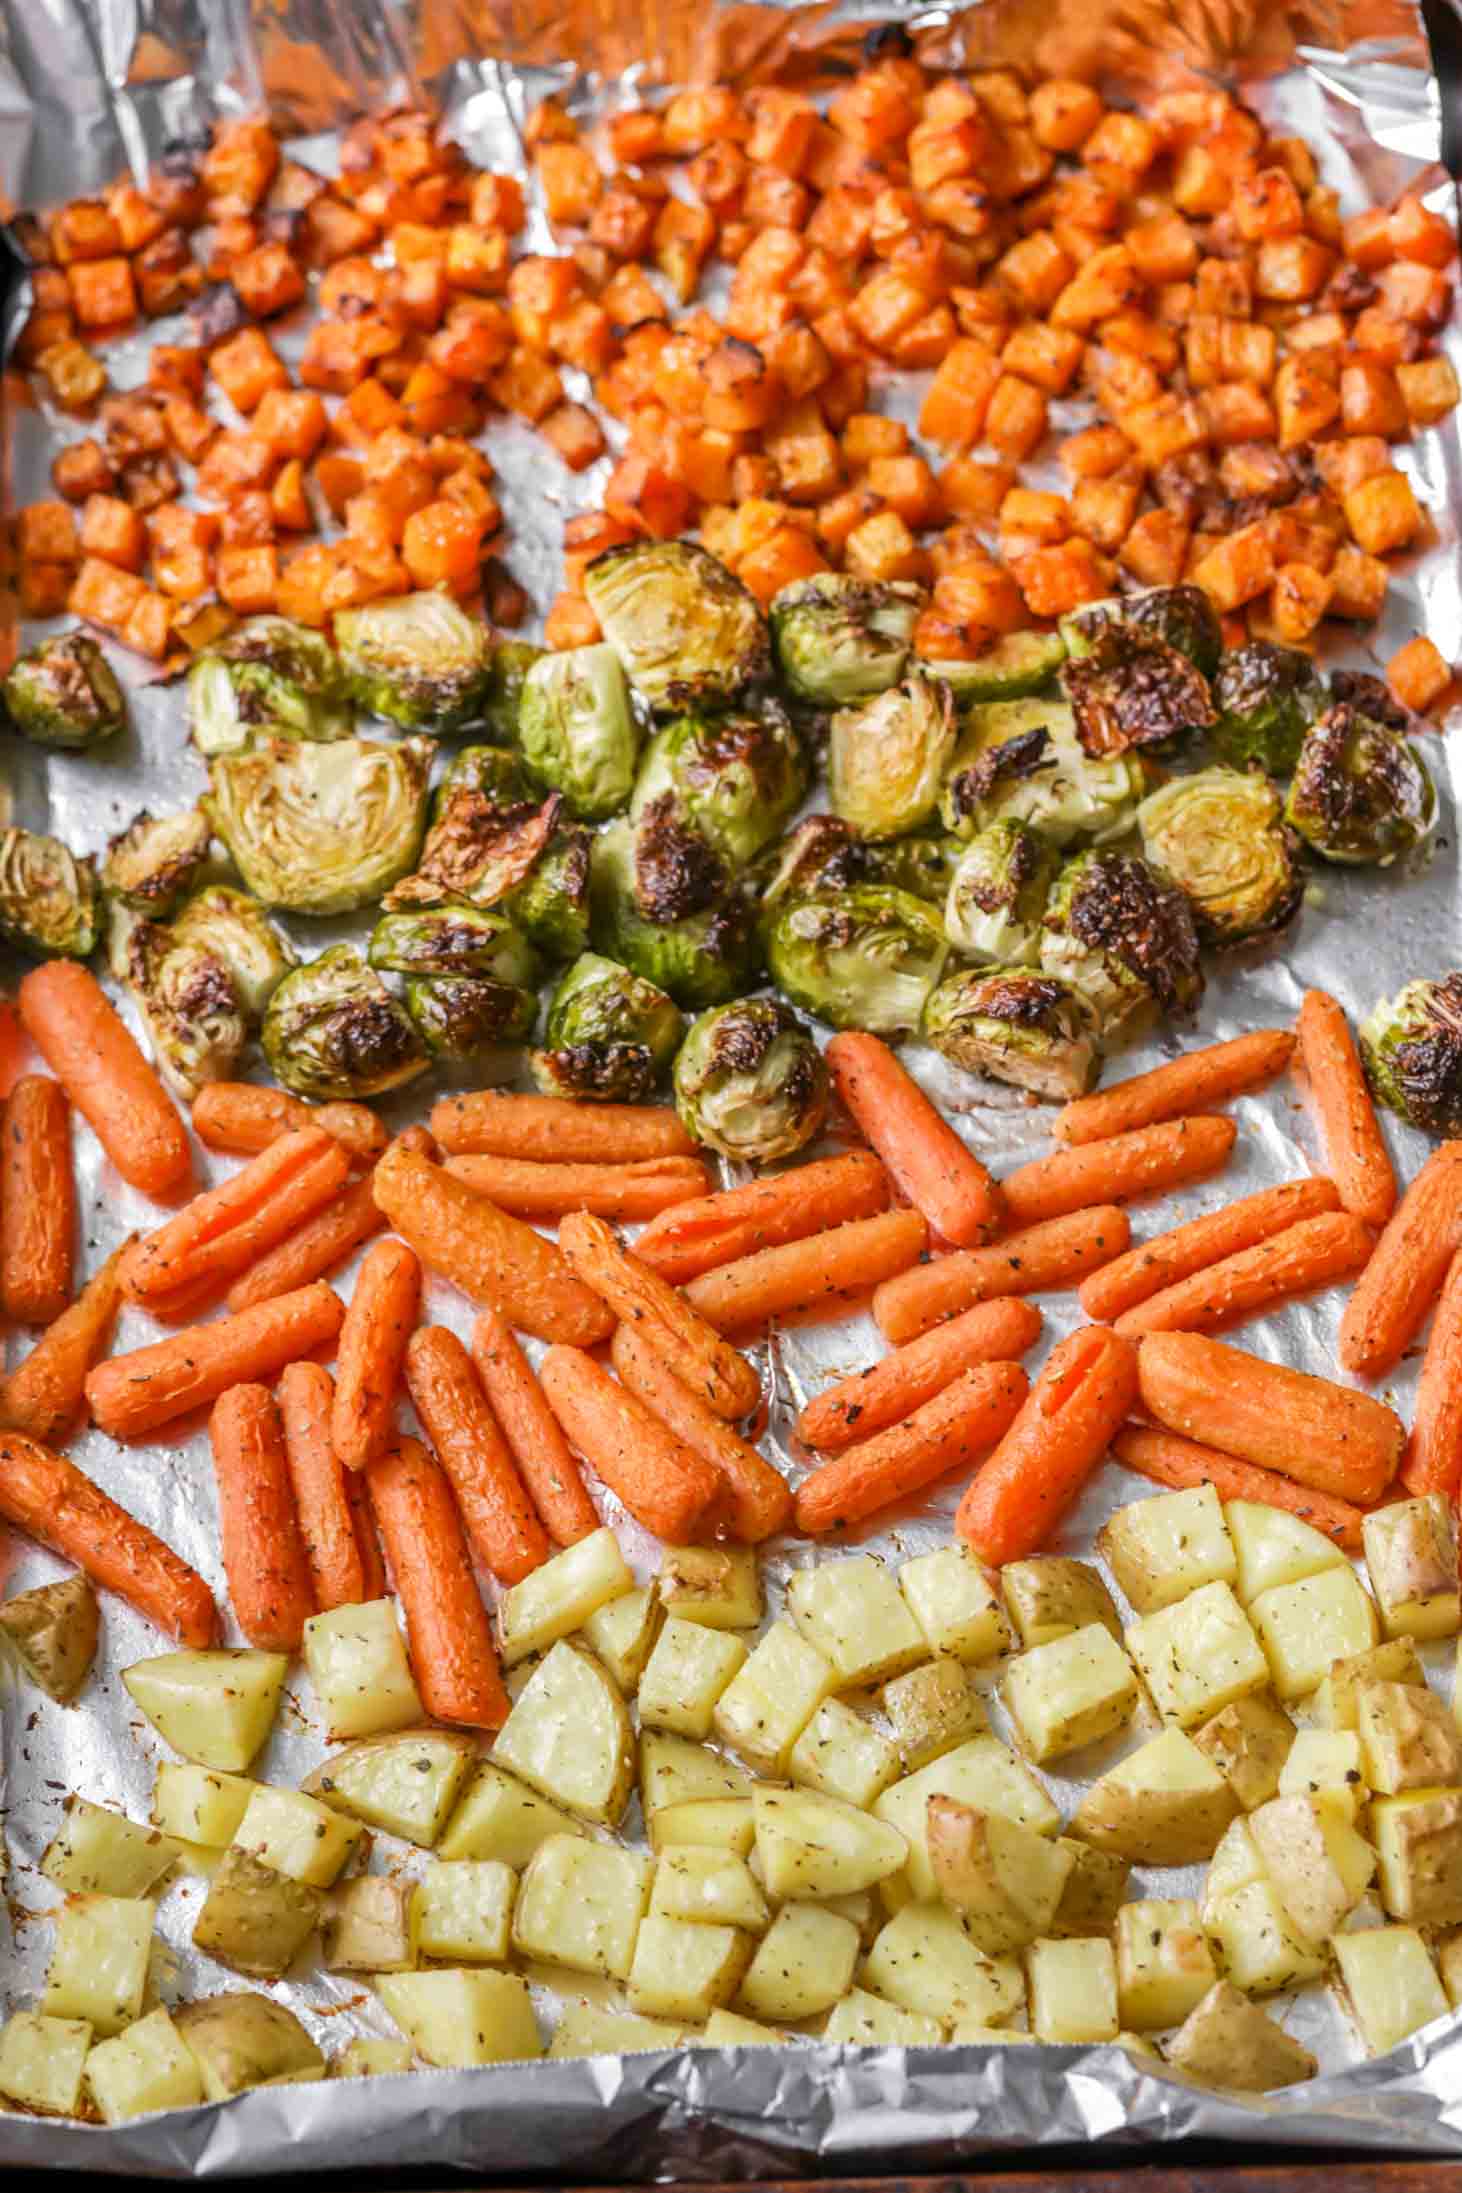 Oven roasted veggies on a pan